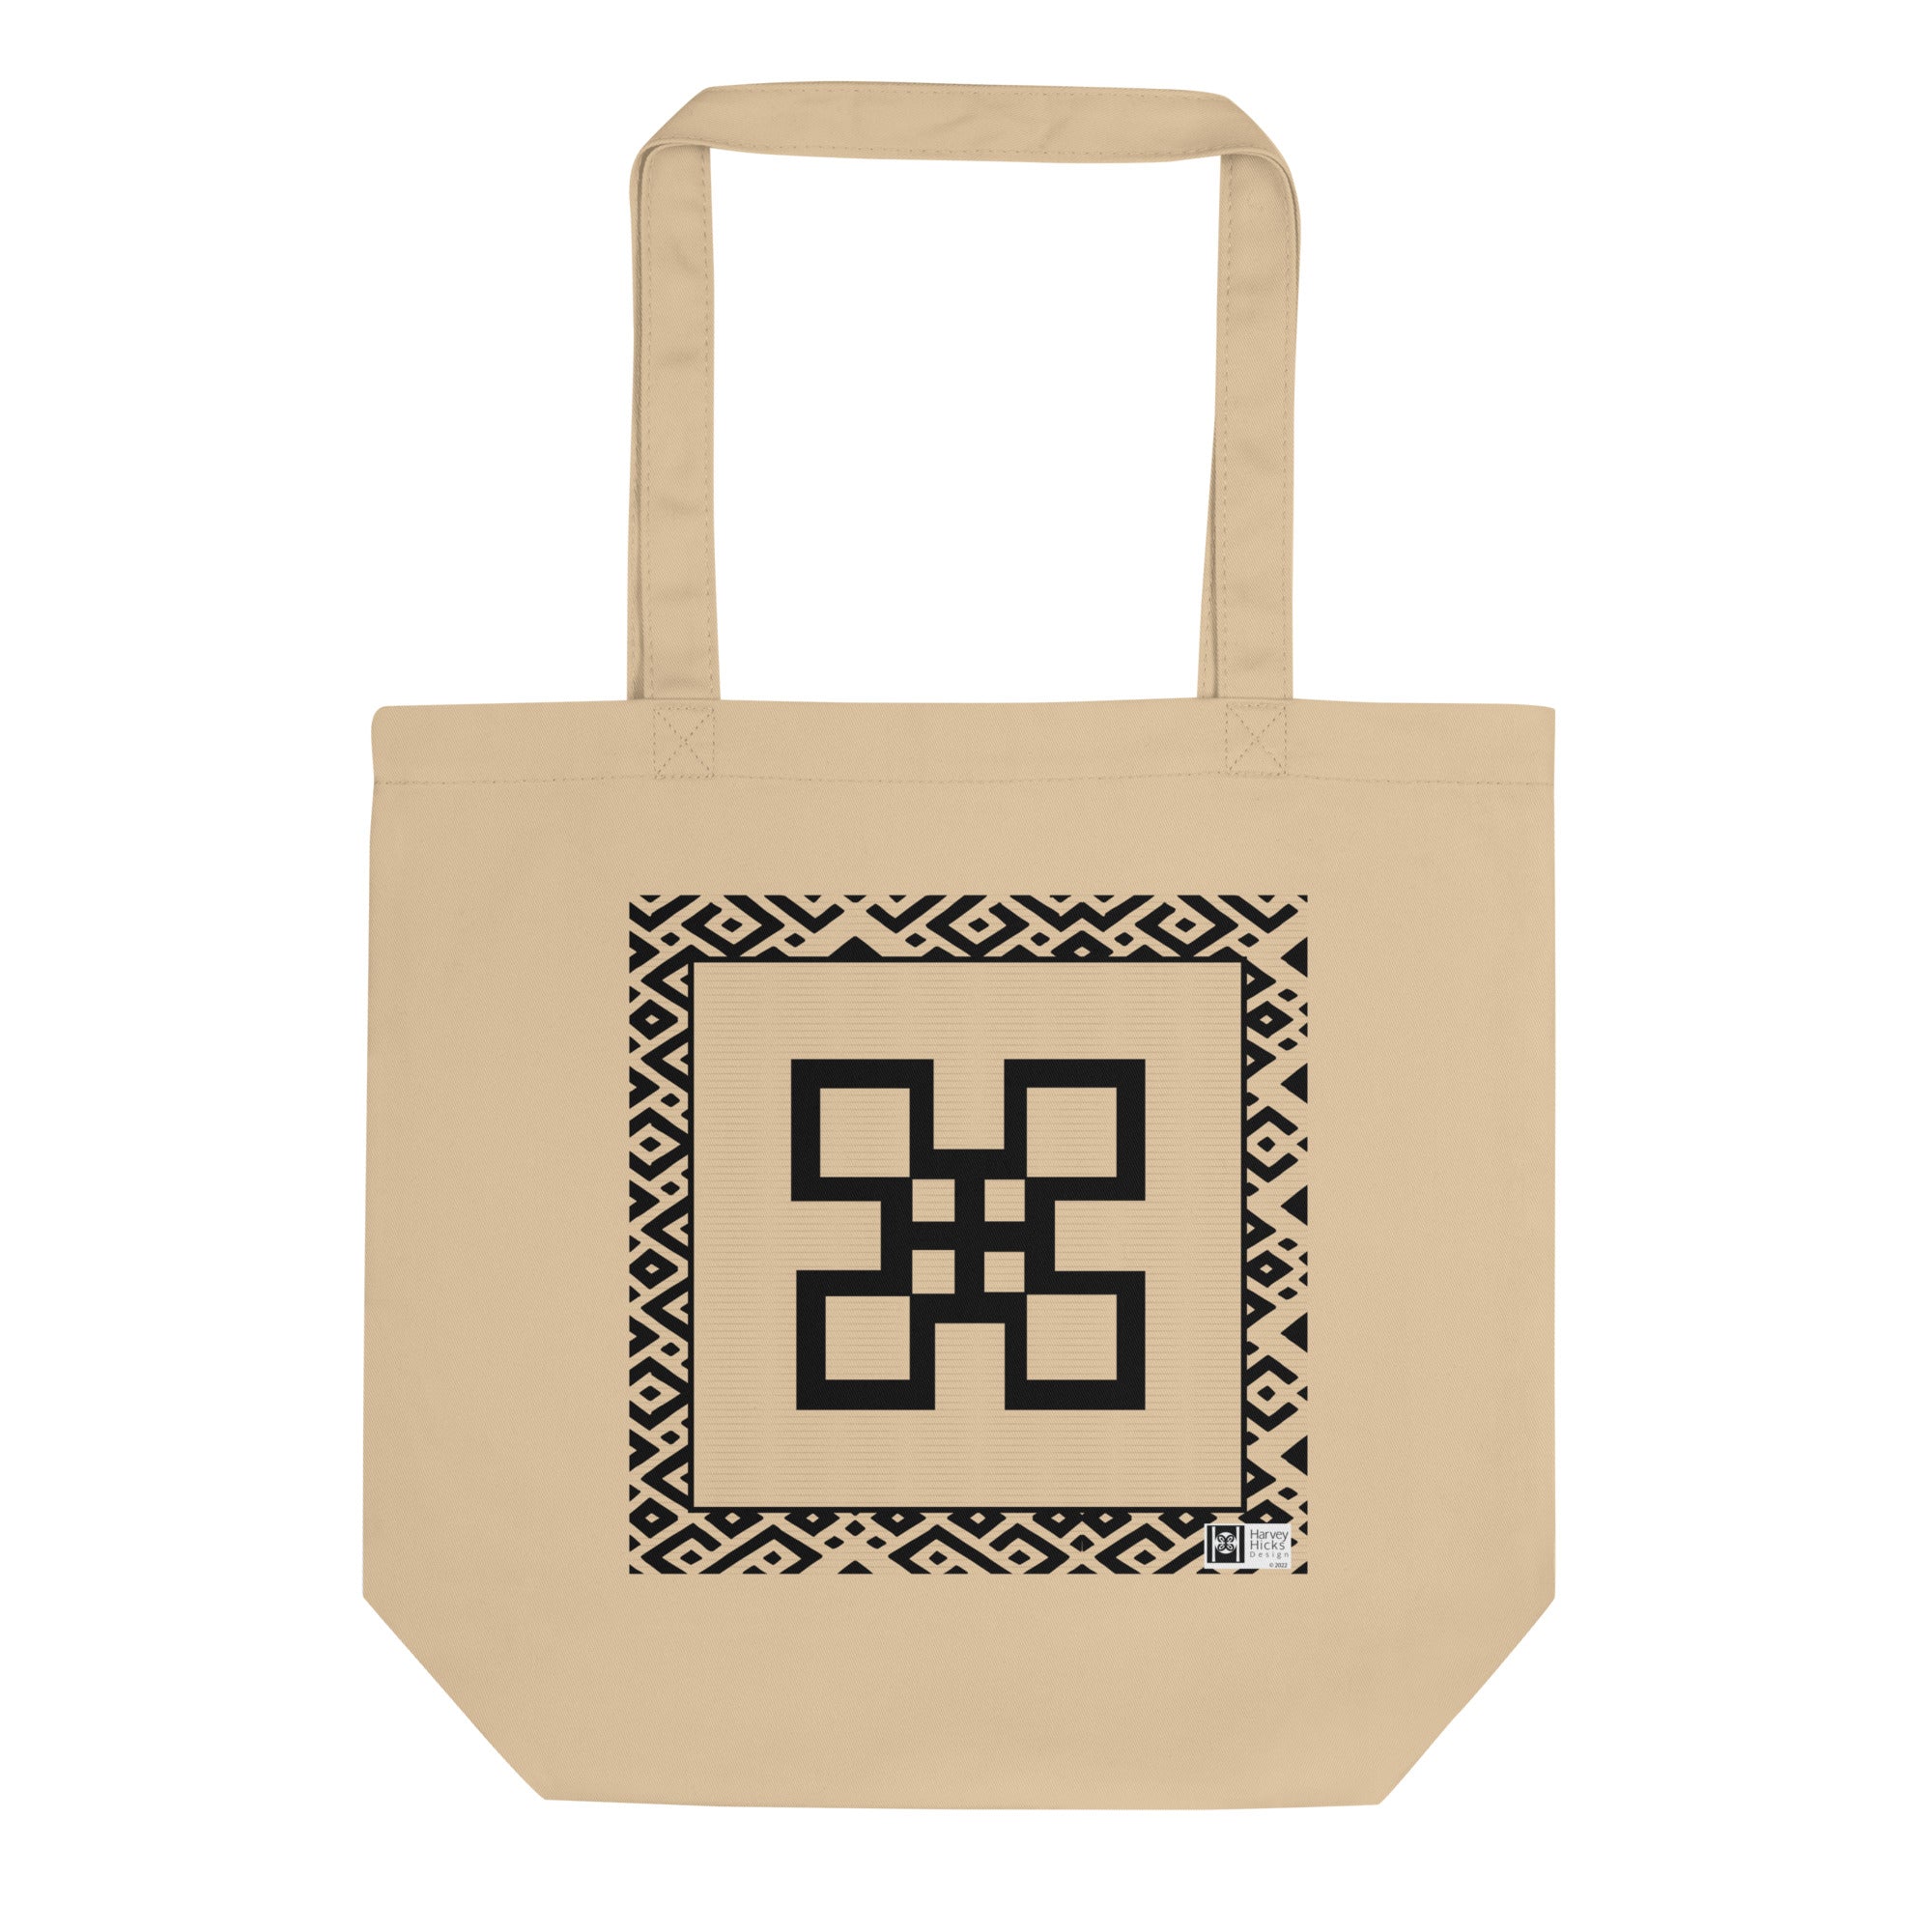 100% cotton Eco Tote Bag, featuring the Adinkra symbol for excellence, NO TEXT